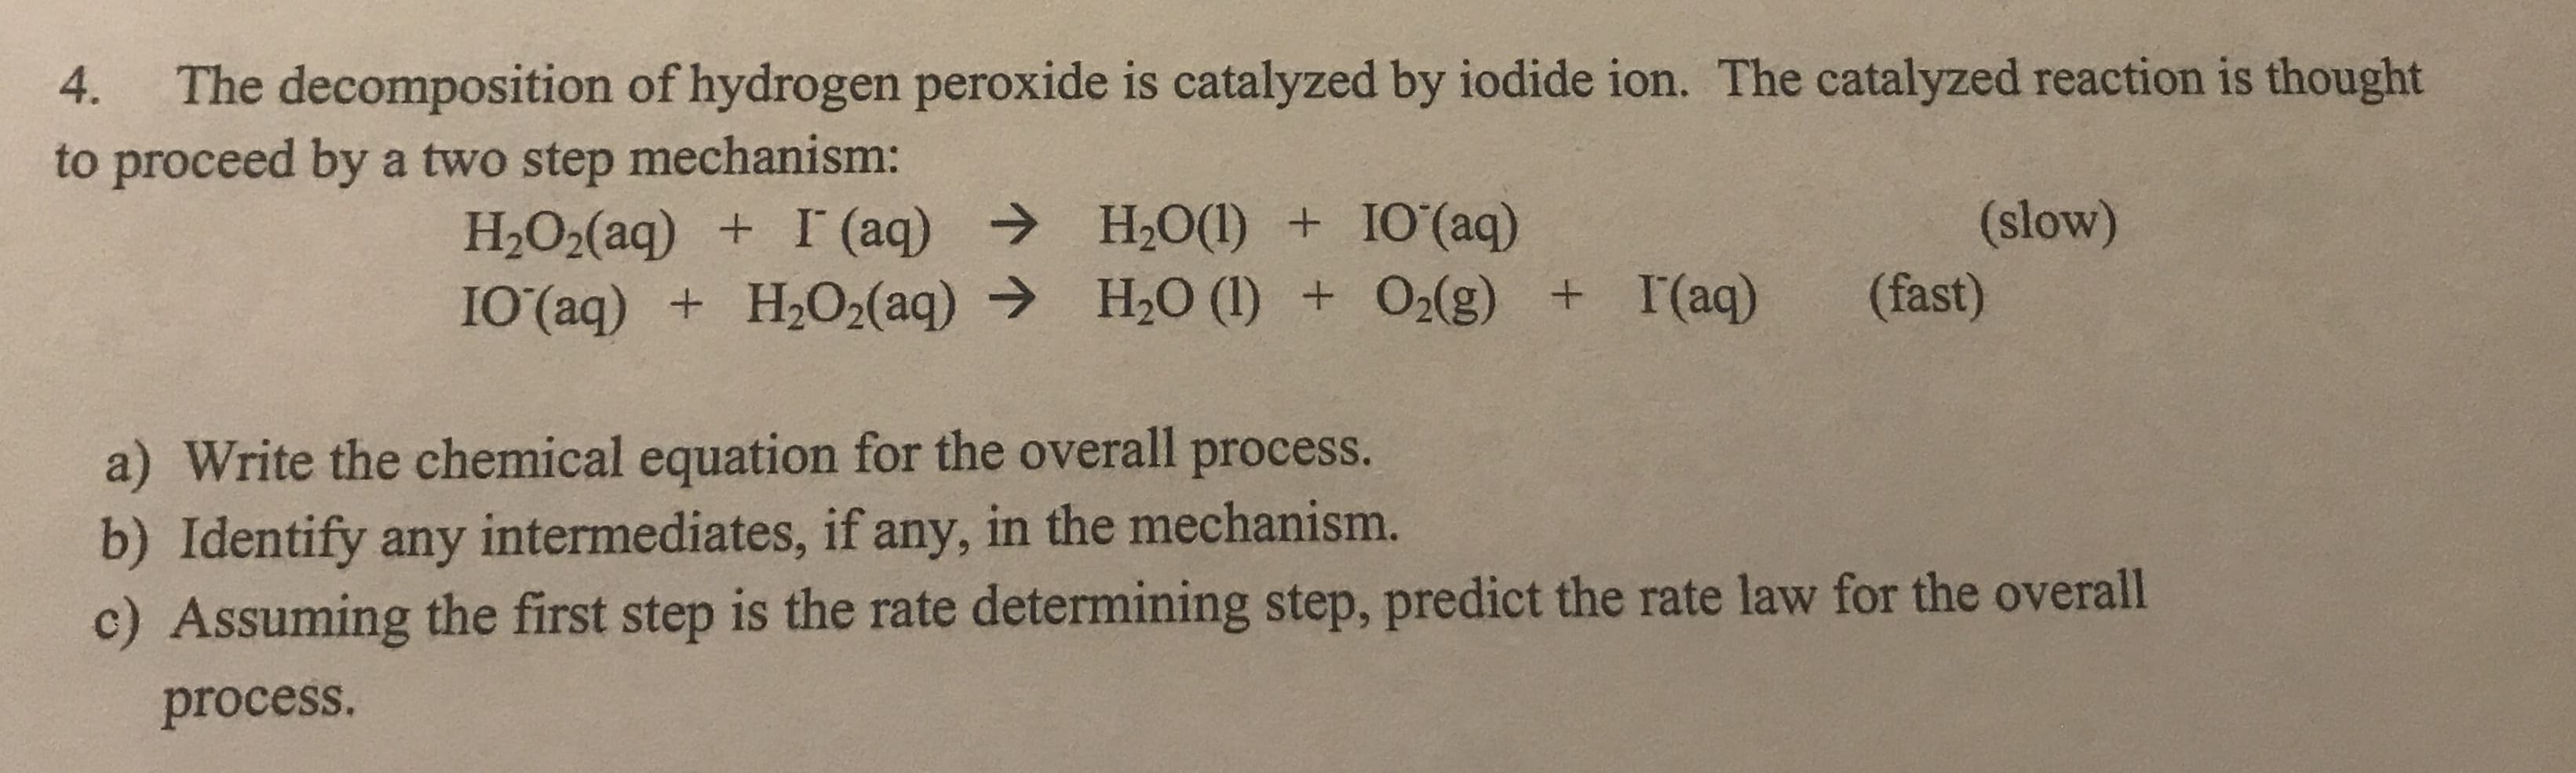 The decomposition of hydrogen peroxide is catalyzed by iodide ion. The catalyzed reaction is thought
to proceed by a two step mechanism:
4.
H2O2(aq) + I (aq) → H2O(1) + IO'(aq)
I0(aq) + H2O2(aq) → H20 (1) + O2(g) + I(aq)
(slow)
(fast)
a) Write the chemical equation for the overall process.
b) Identify any intermediates, if any, in the mechanism.
c) Assuming the first step is the rate determining step, predict the rate law for the overall
process.
